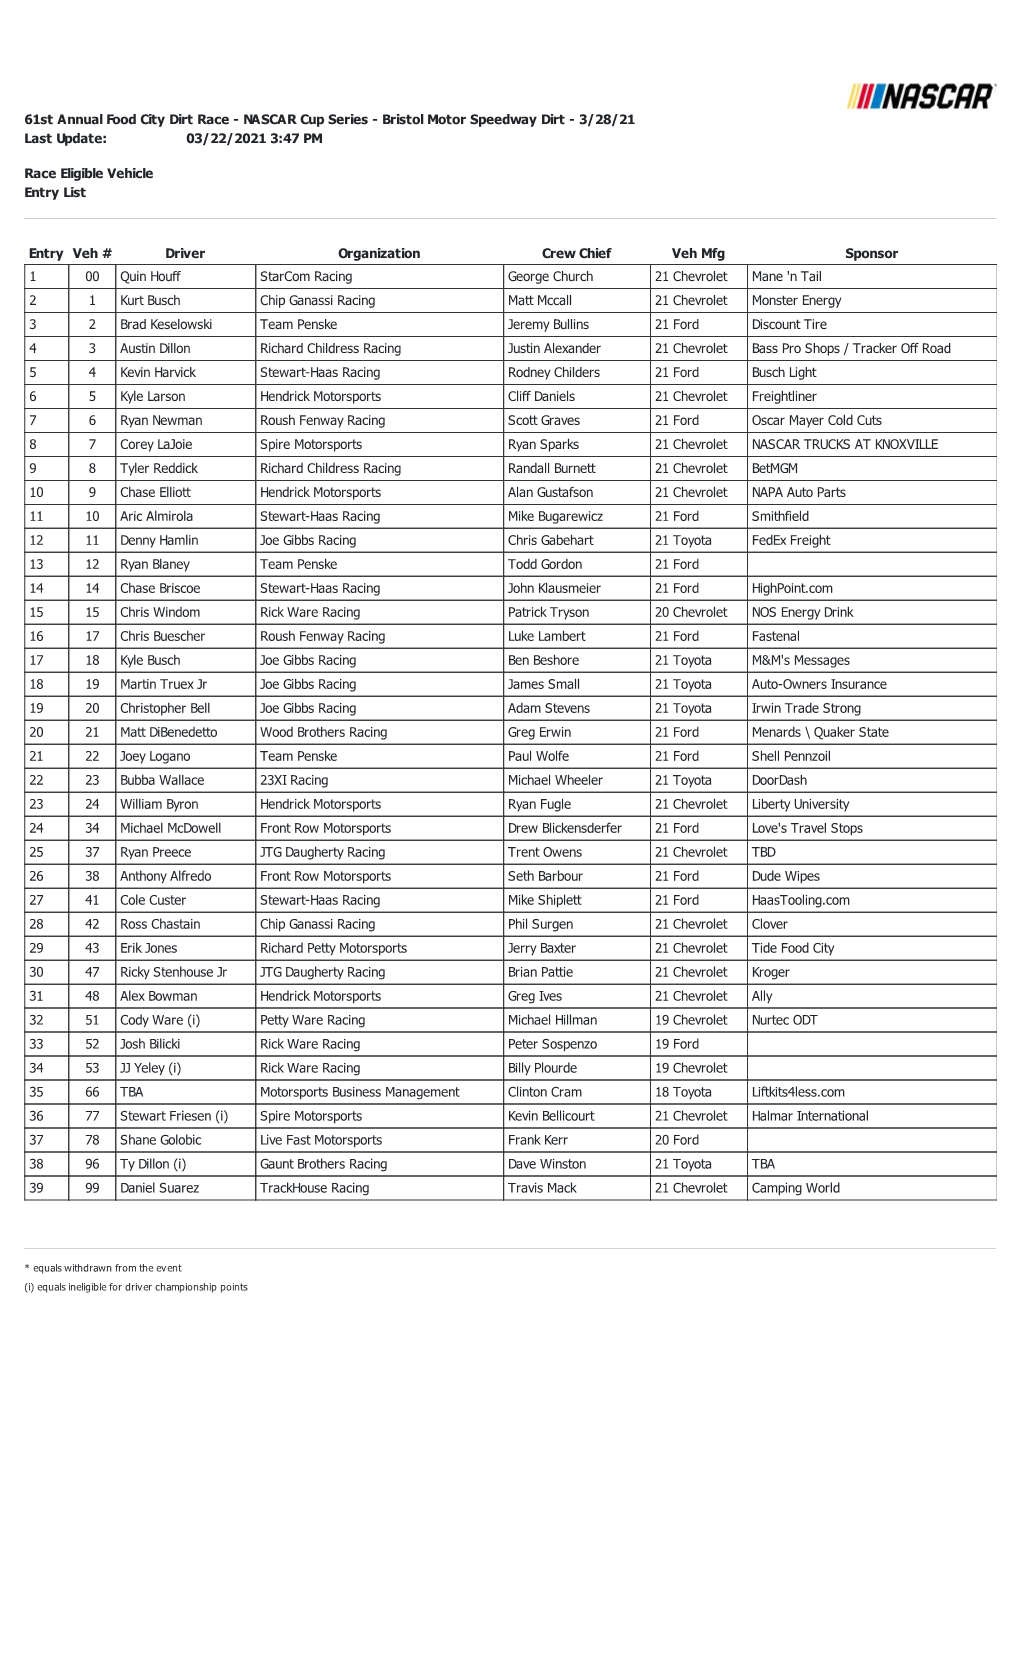 03/22/2021 3:47 PM Race Eligible Vehicle Entry List 61St Annual Food